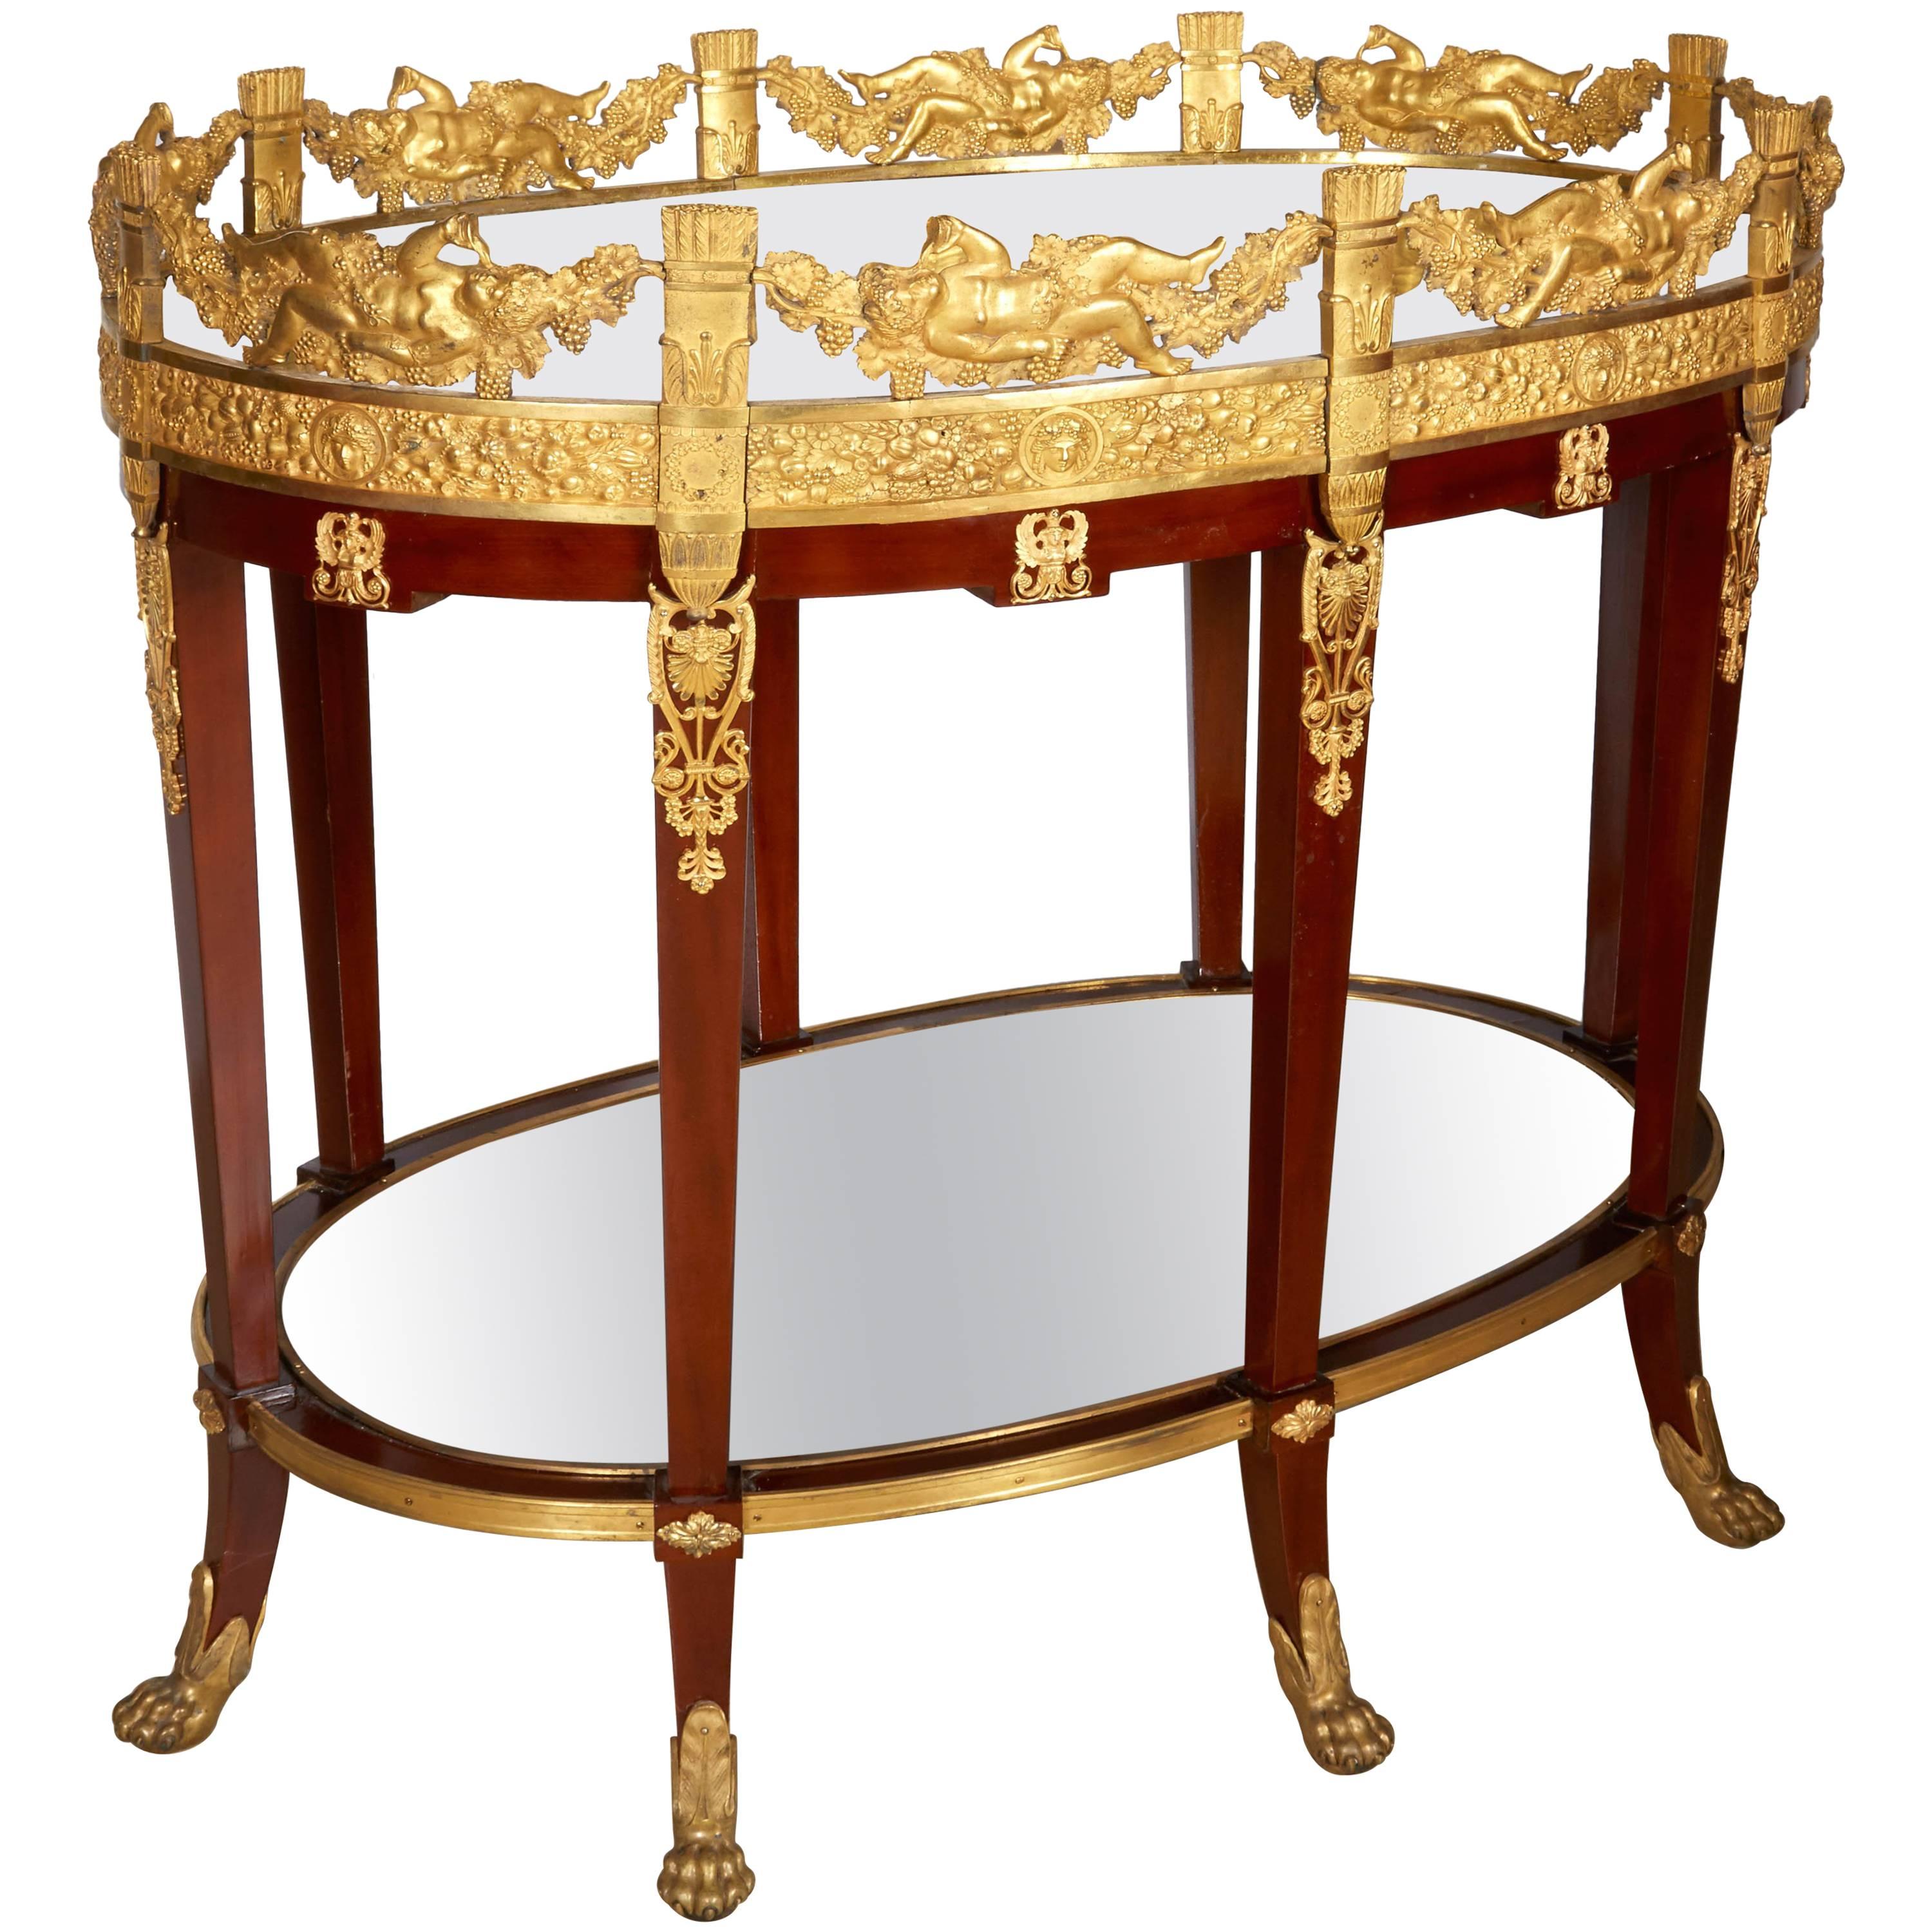 An exquisite French ormolu bronze and mahogany surtout de table plateau / bar cart

Attributed to Pierre Philippe Thomire, circa 1860. 

Exceptional quality, one of the best and finest plateau's we have come across. All original with mahogany, with